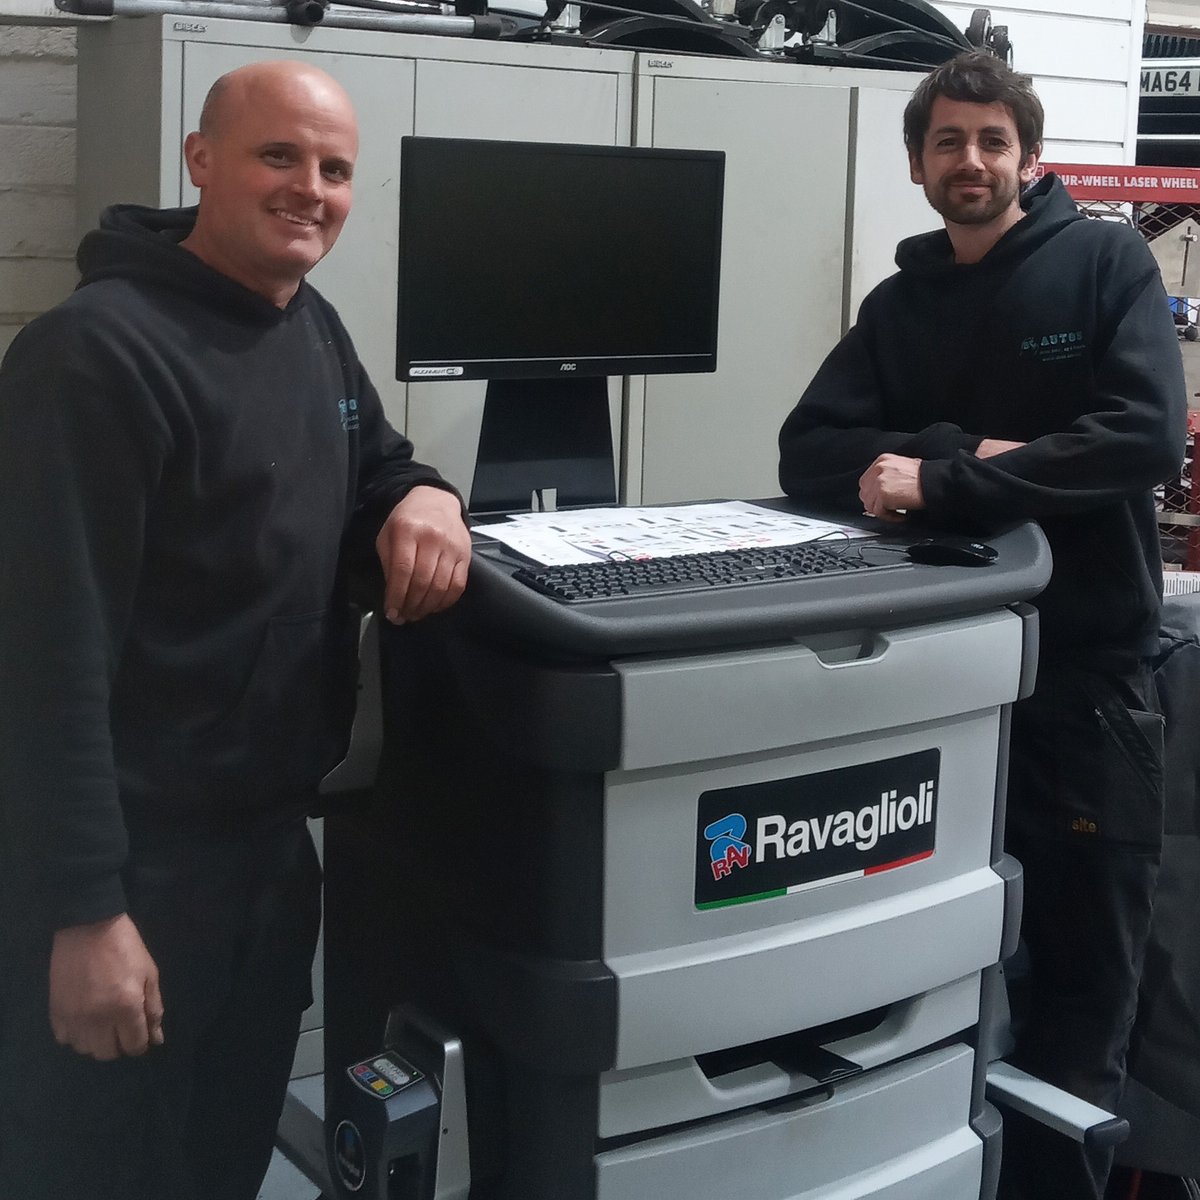 Another recent install of this great wheel alignment system from Ravaglioli. This time at BC Autos in Christchurch. The guys here look very pleased to receive their handover. Sold via @MotorPartsDir